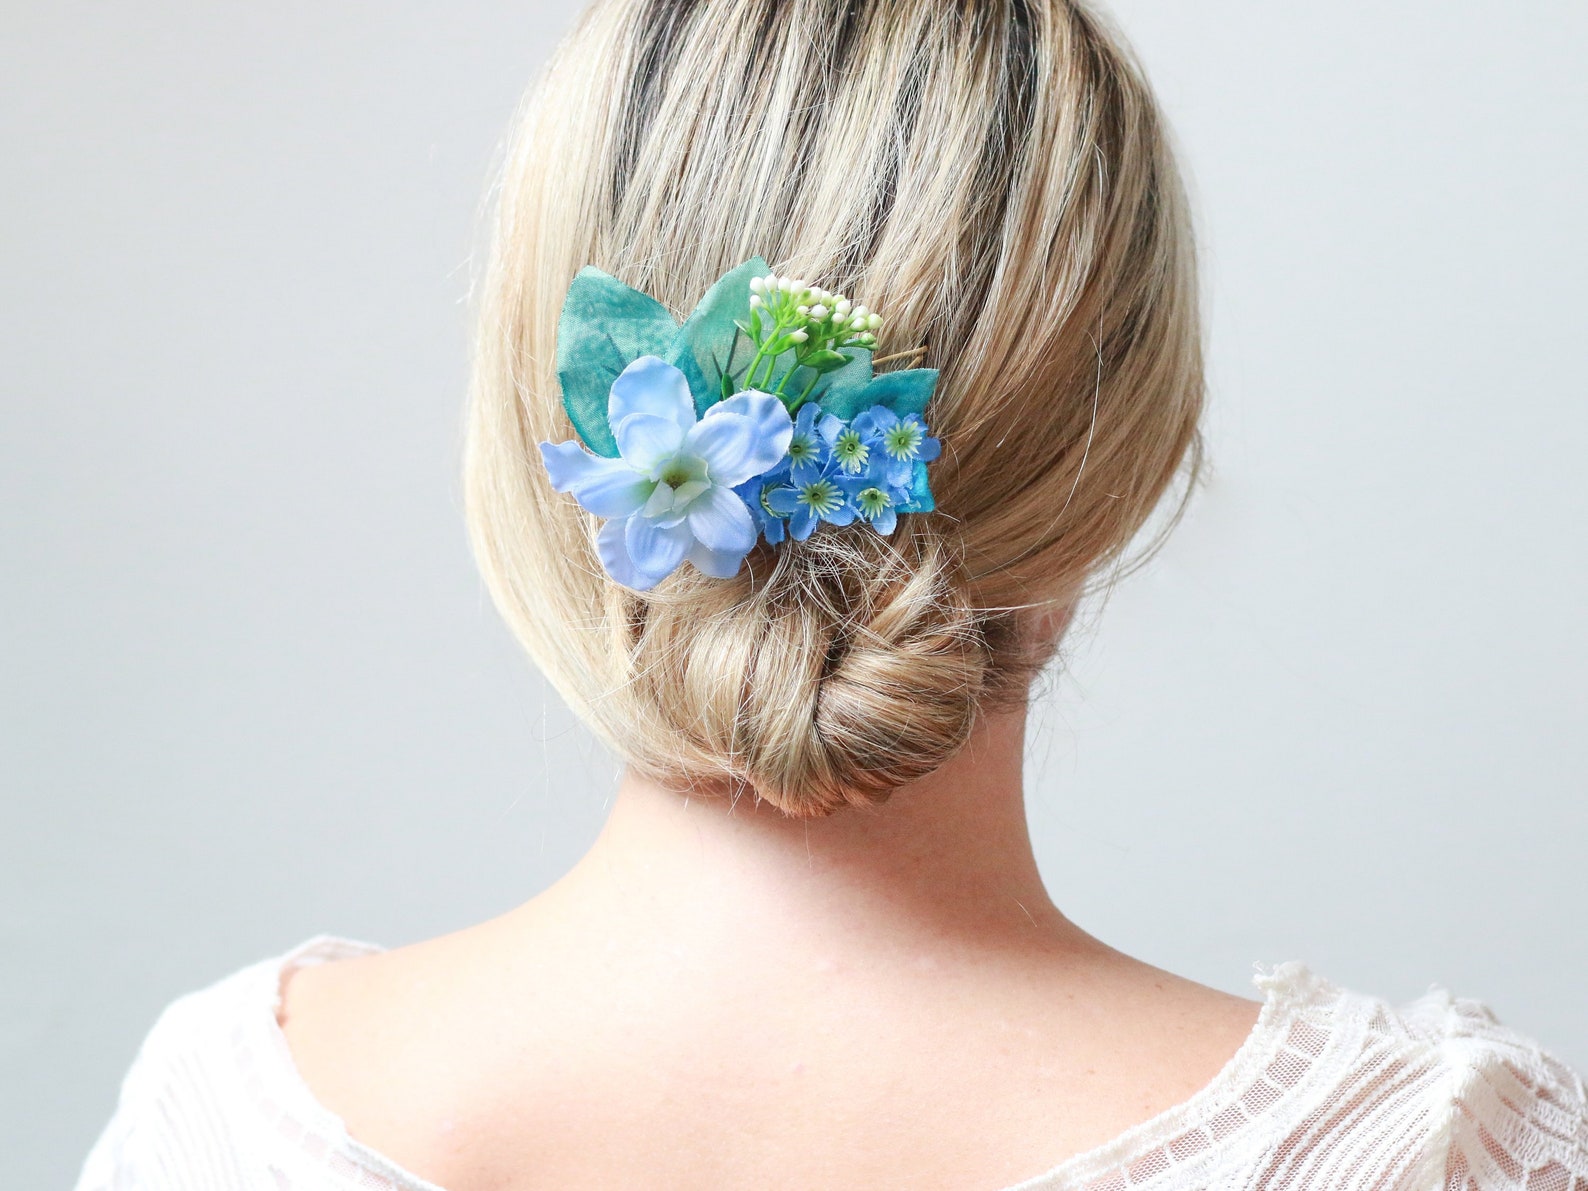 2. Navy Blue Flower Hair Clip for Prom - wide 8